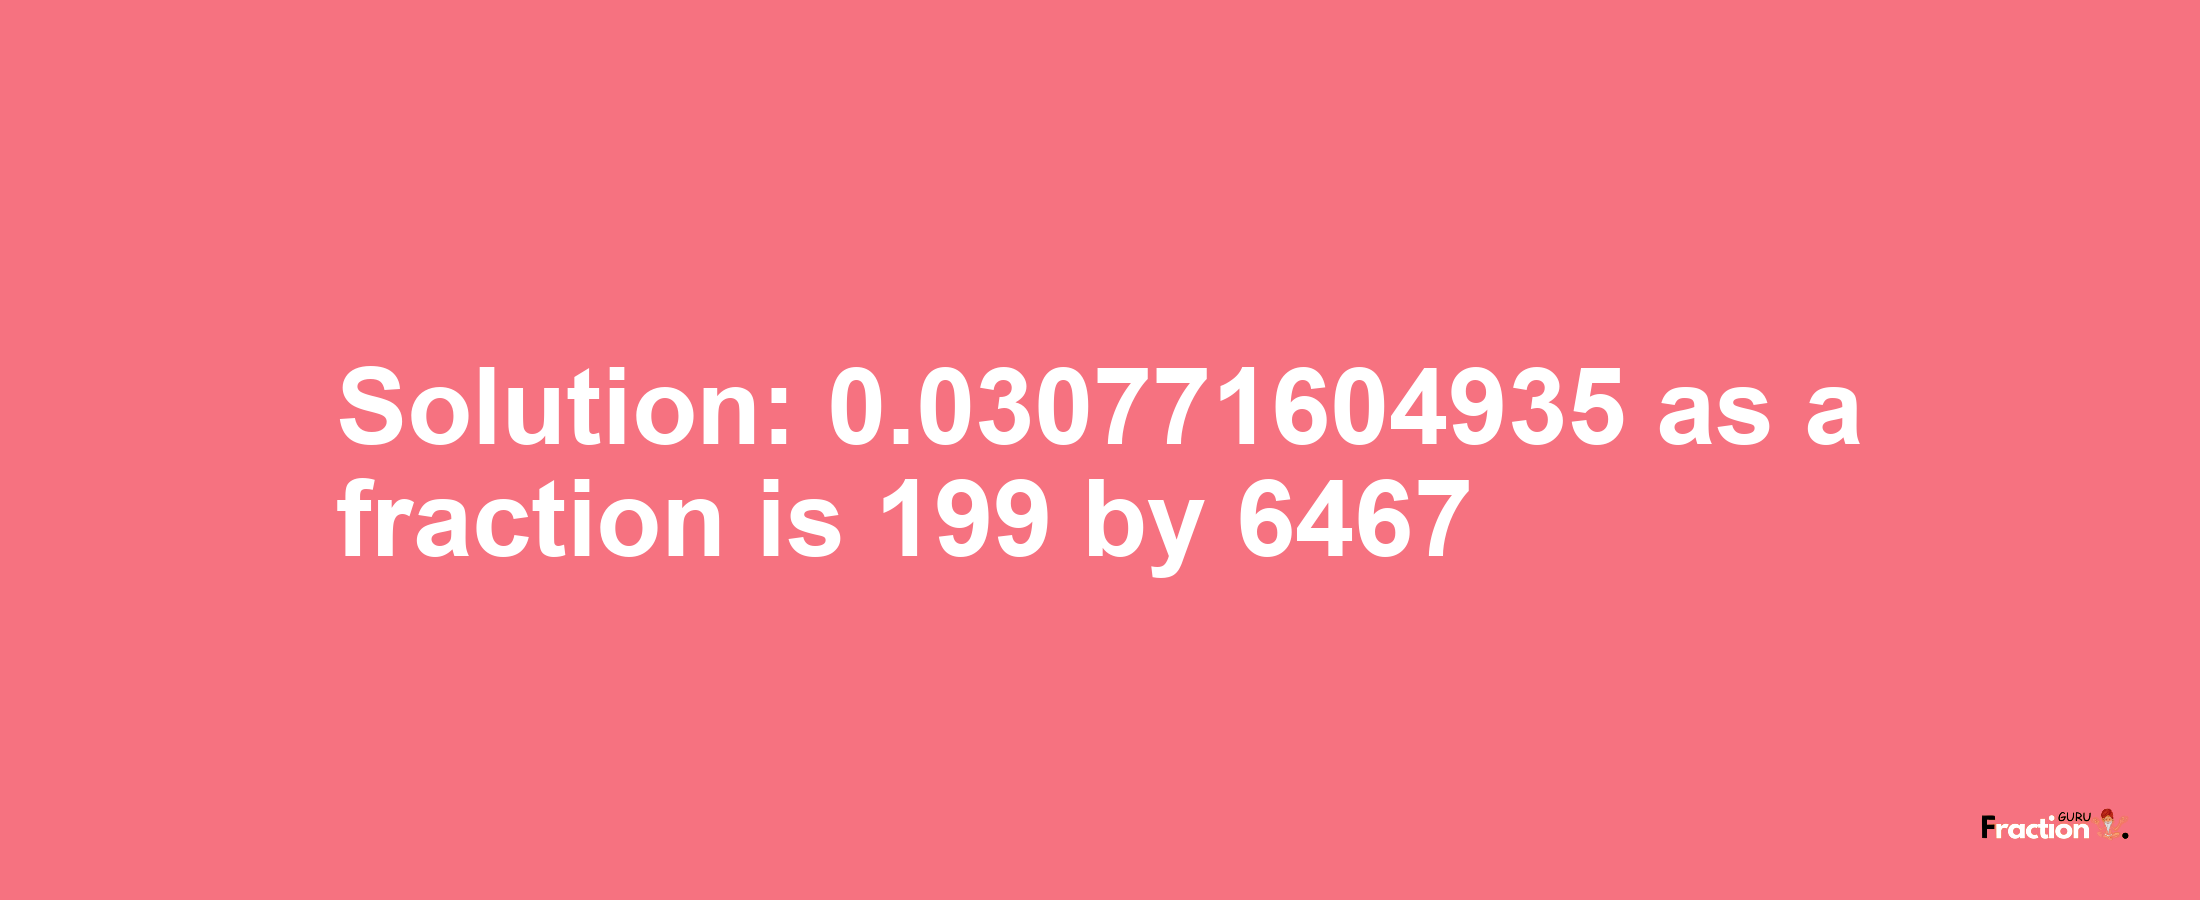 Solution:0.030771604935 as a fraction is 199/6467